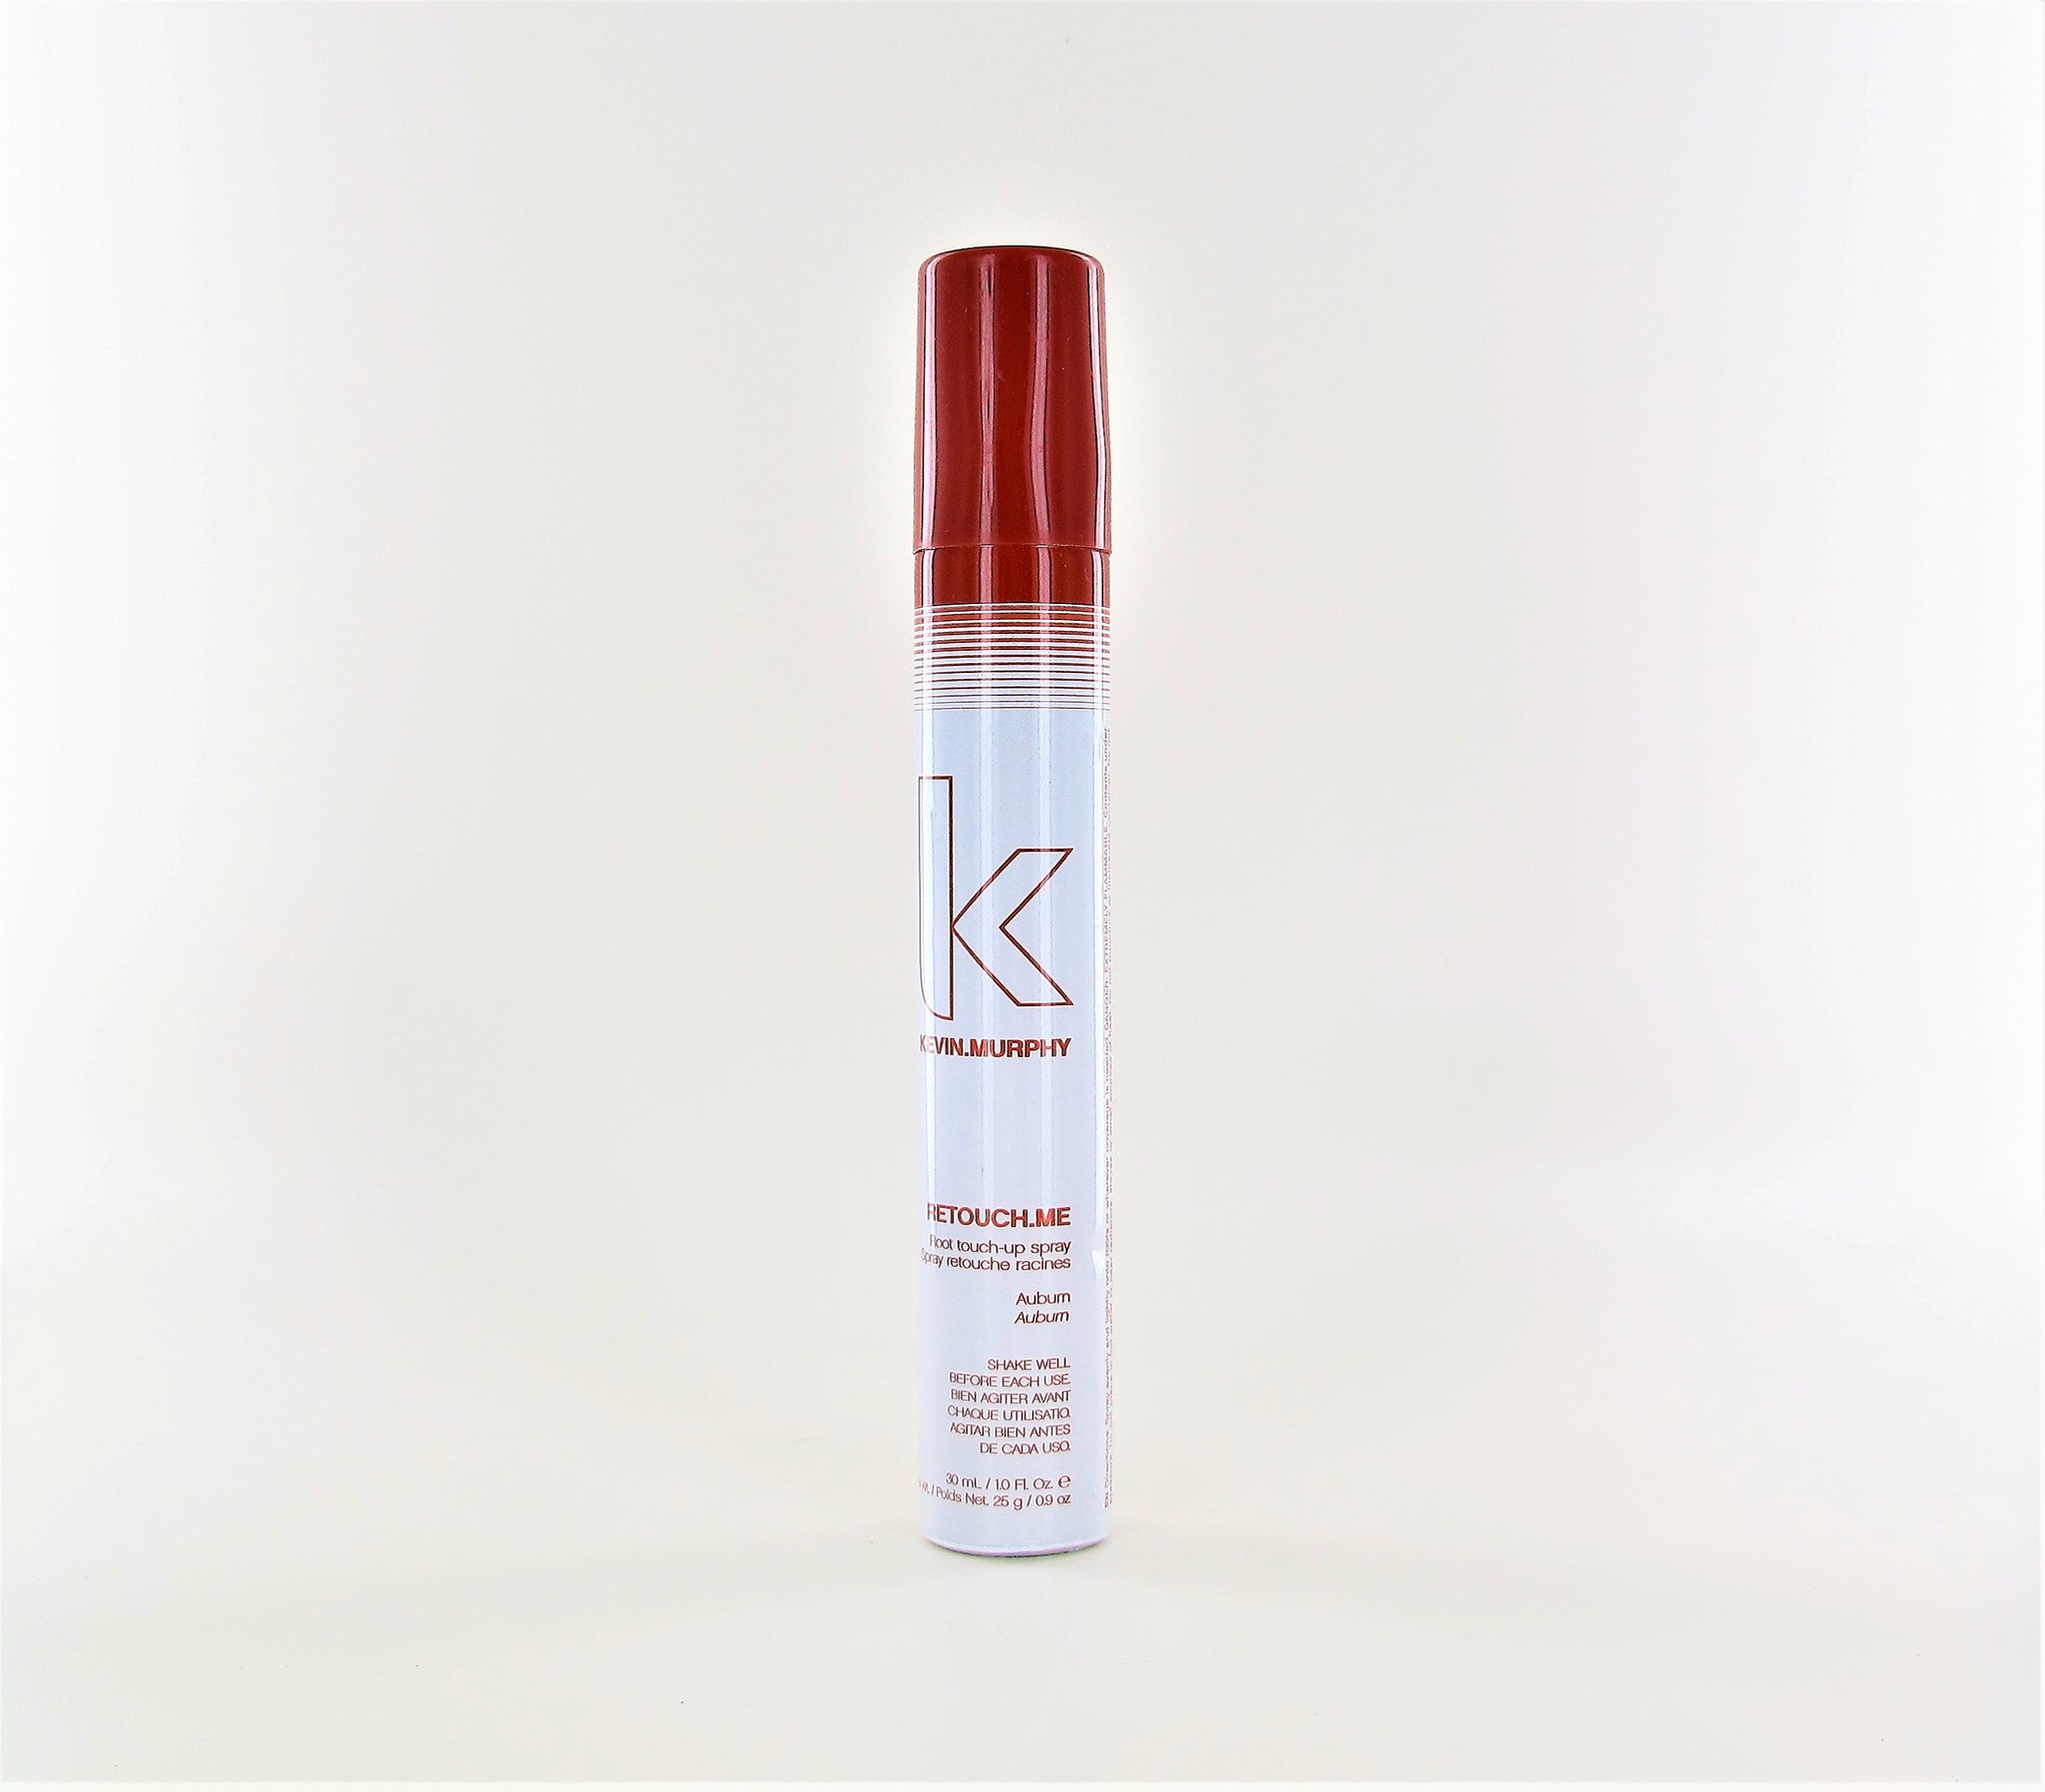 KEVIN MURPHY Retouch Me Root Touch Up Spray Auburn 1 oz